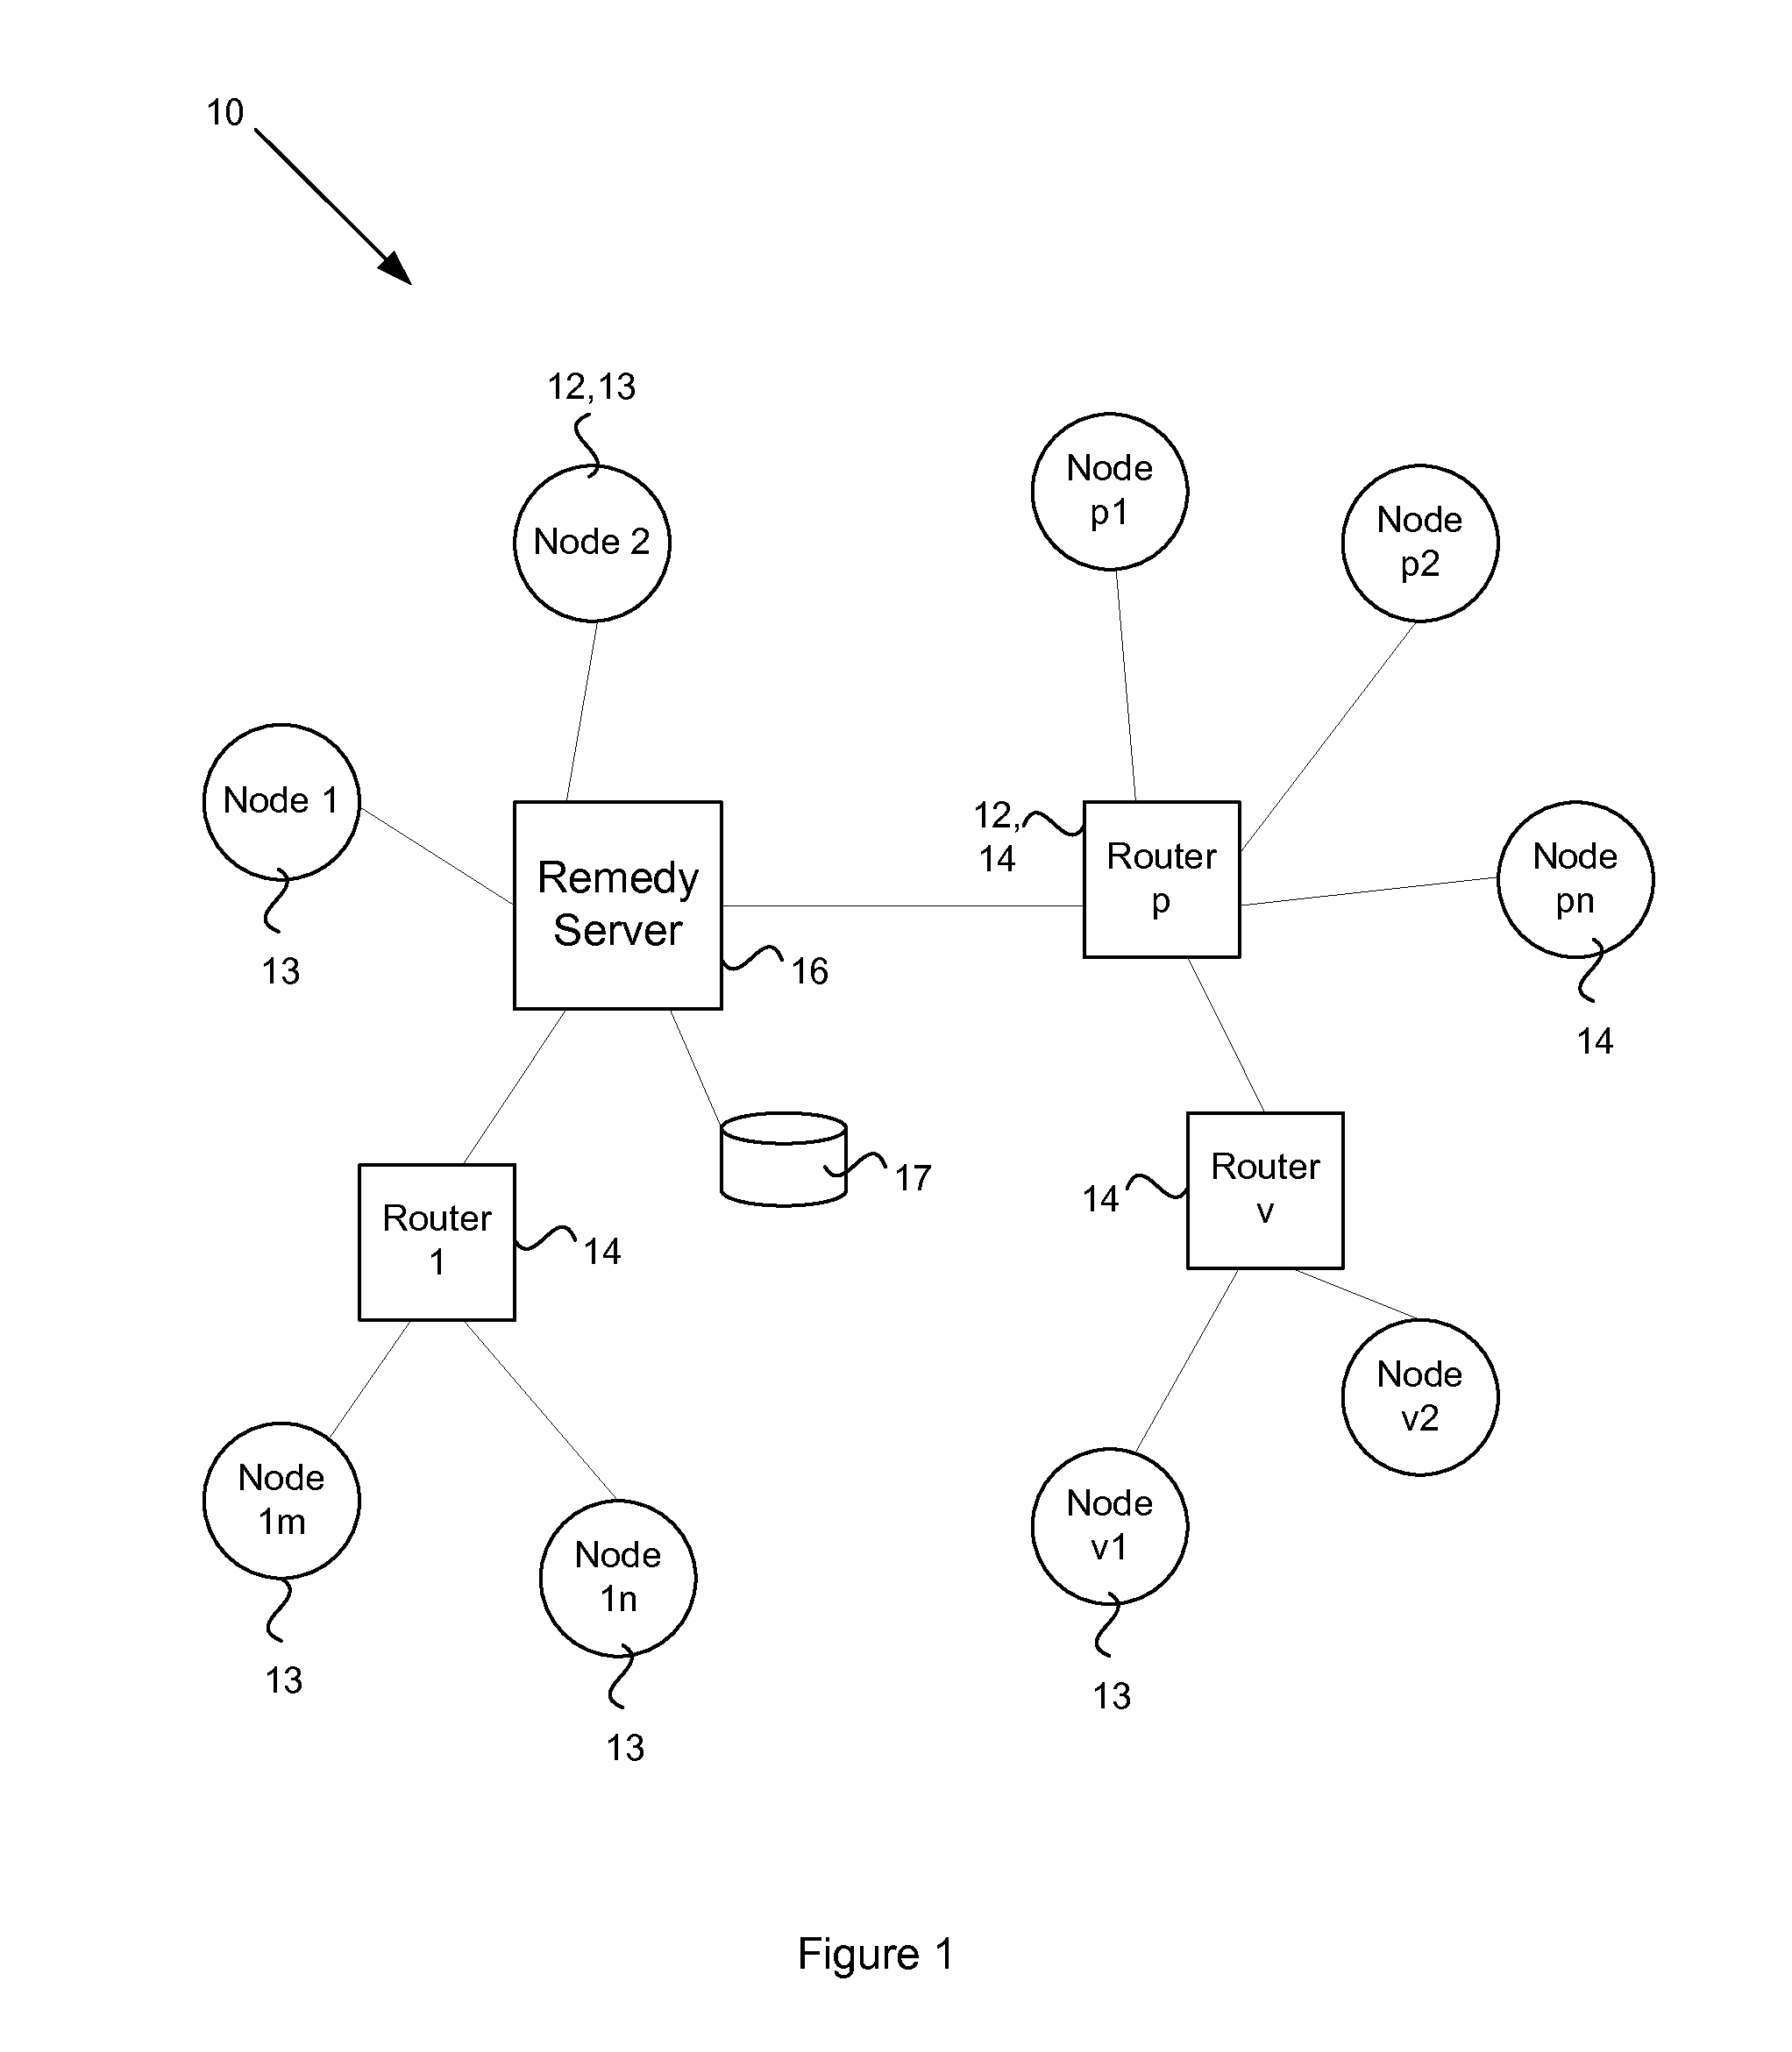 System and method for resolving vulnerabilities in a computer network